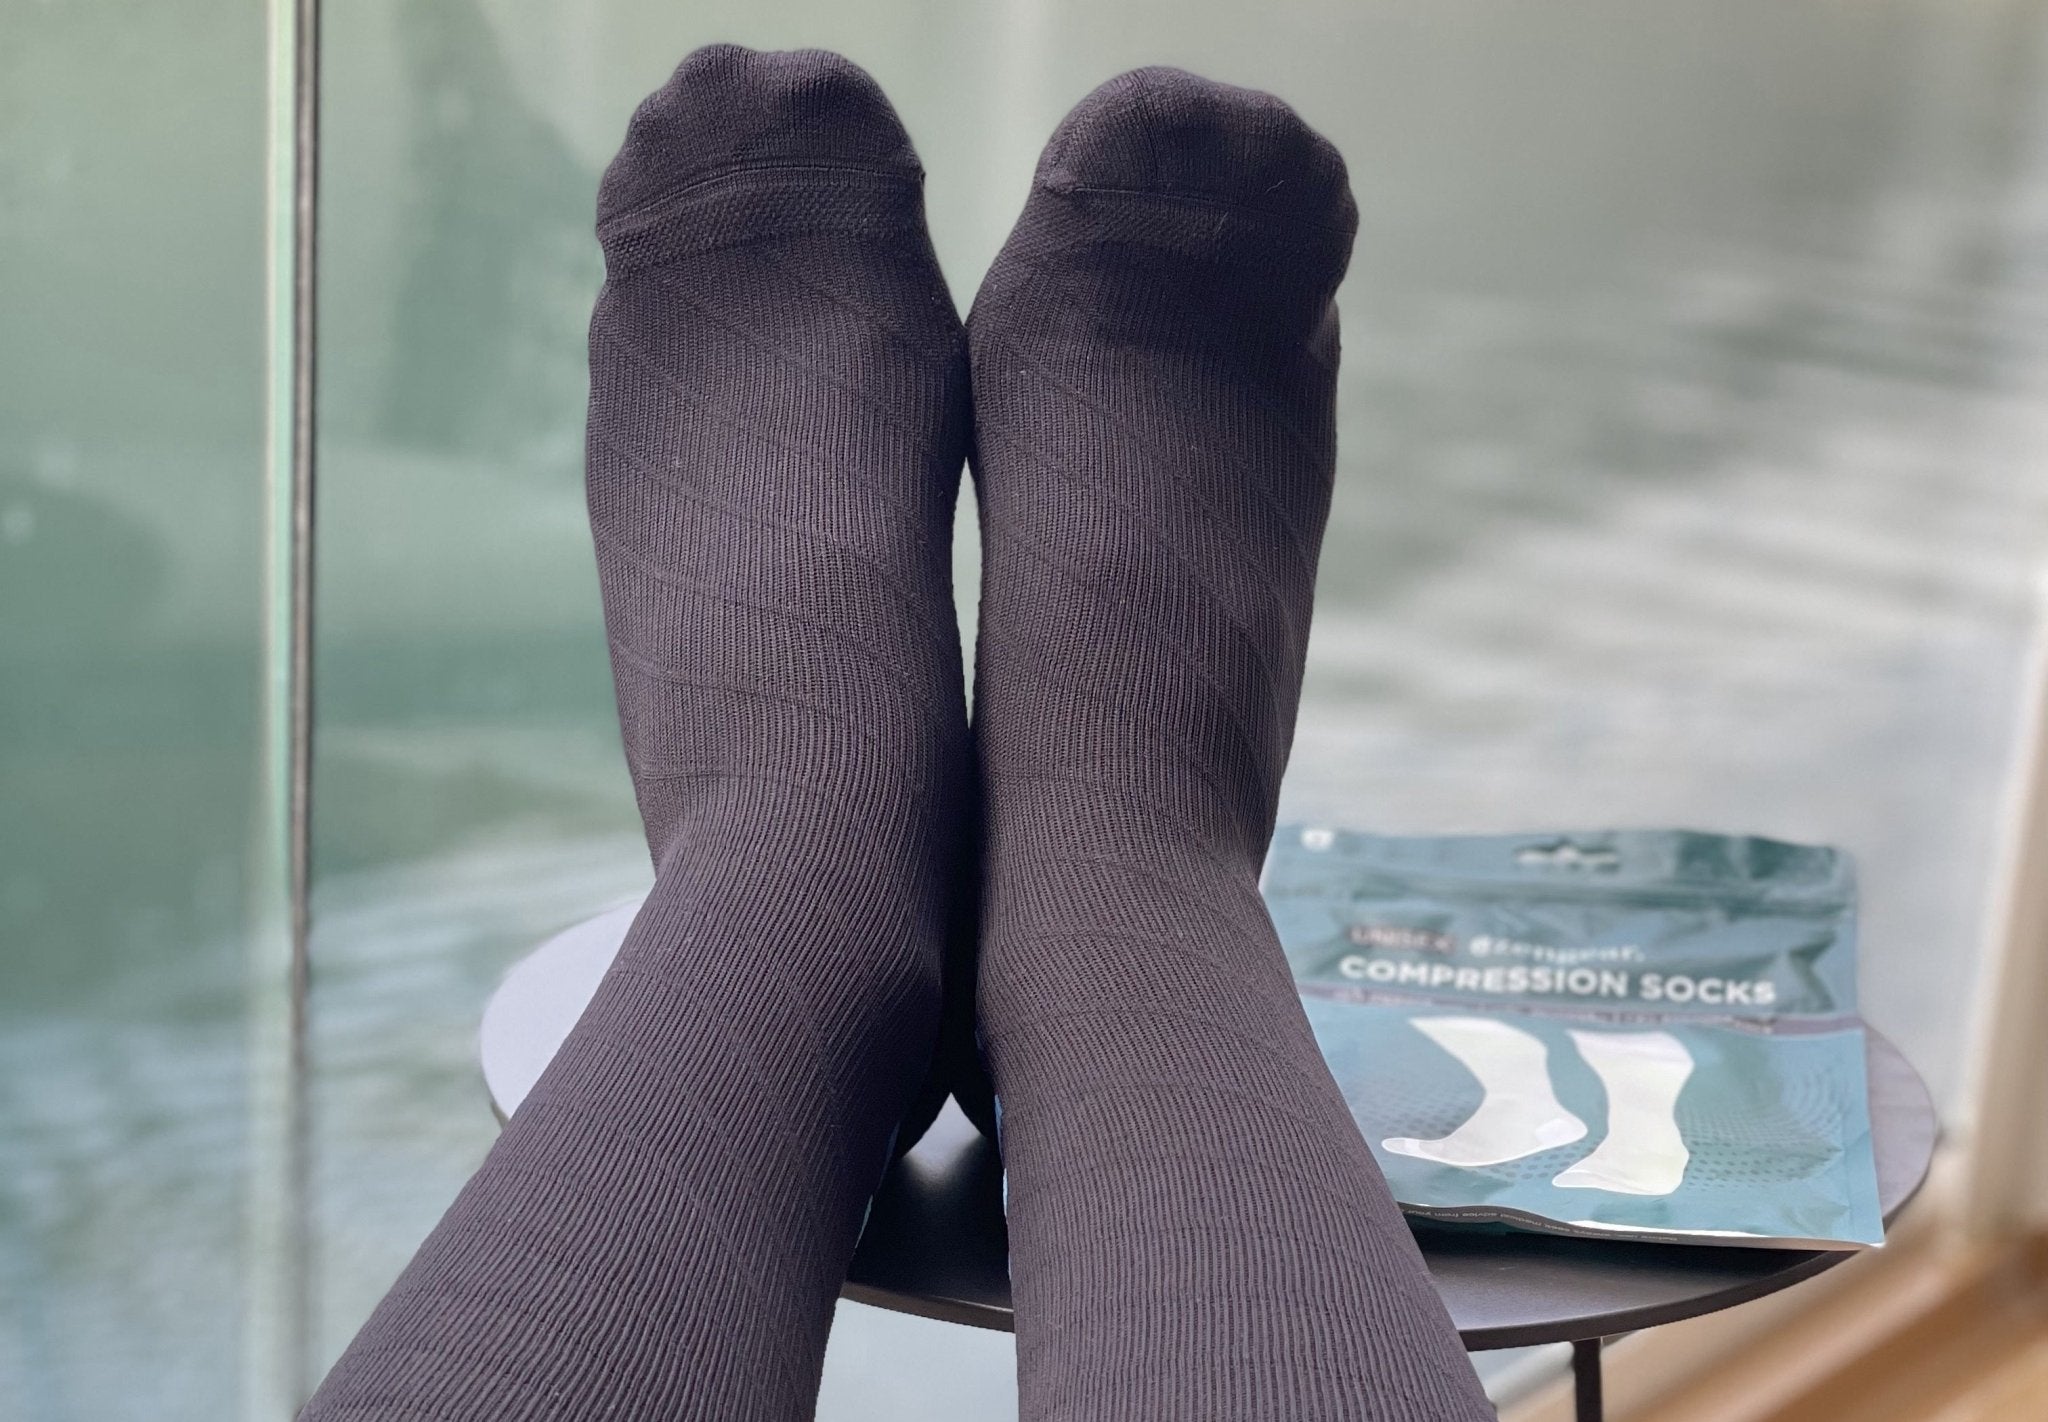 How to Put On Compression Socks with Ease